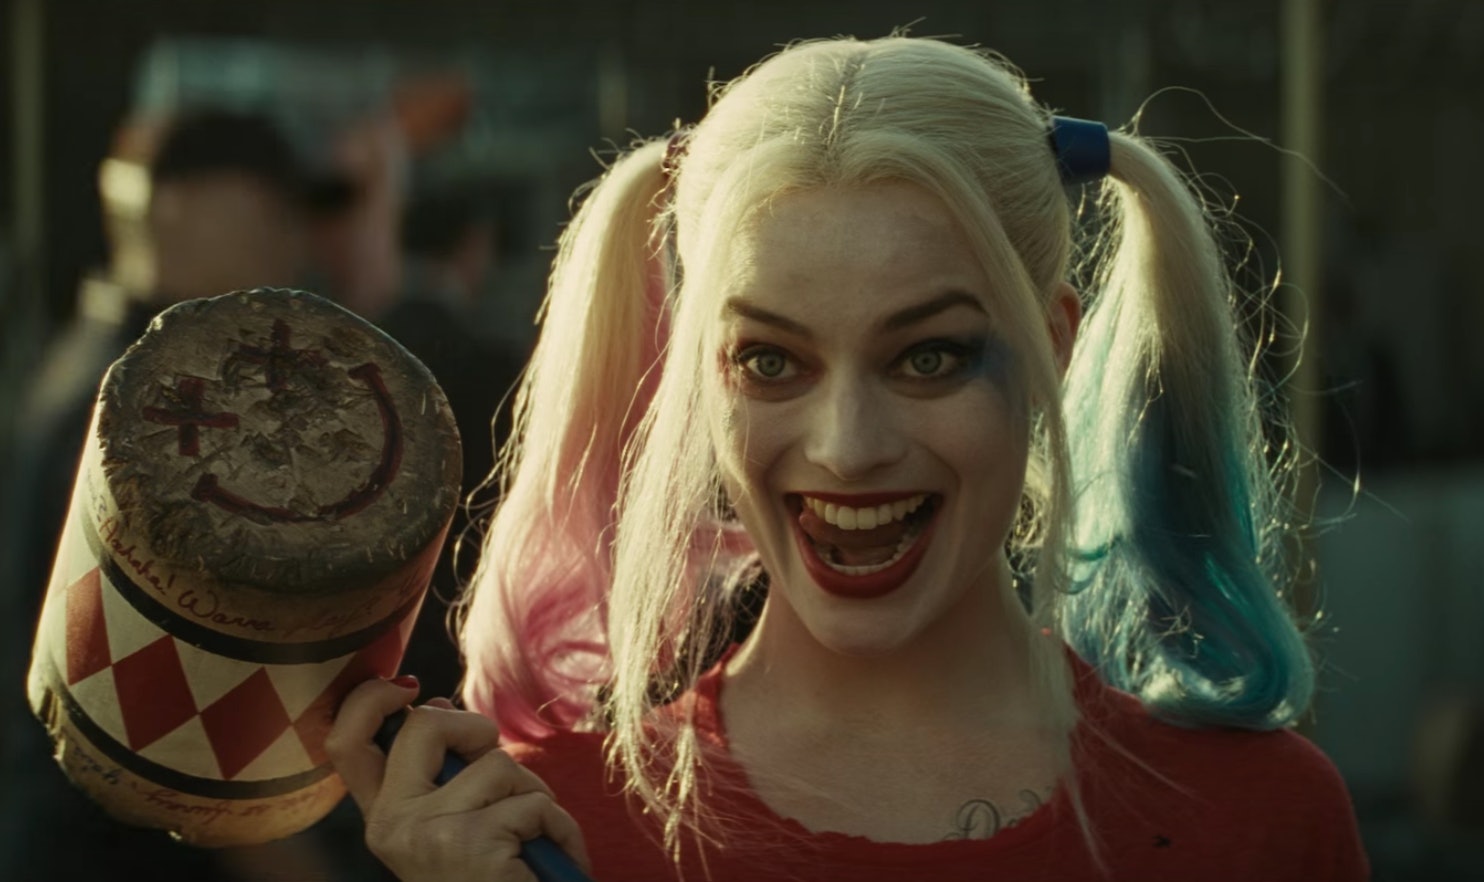 DIY Harley Quinn Halloween Costume Ideas That Will Make You Stand